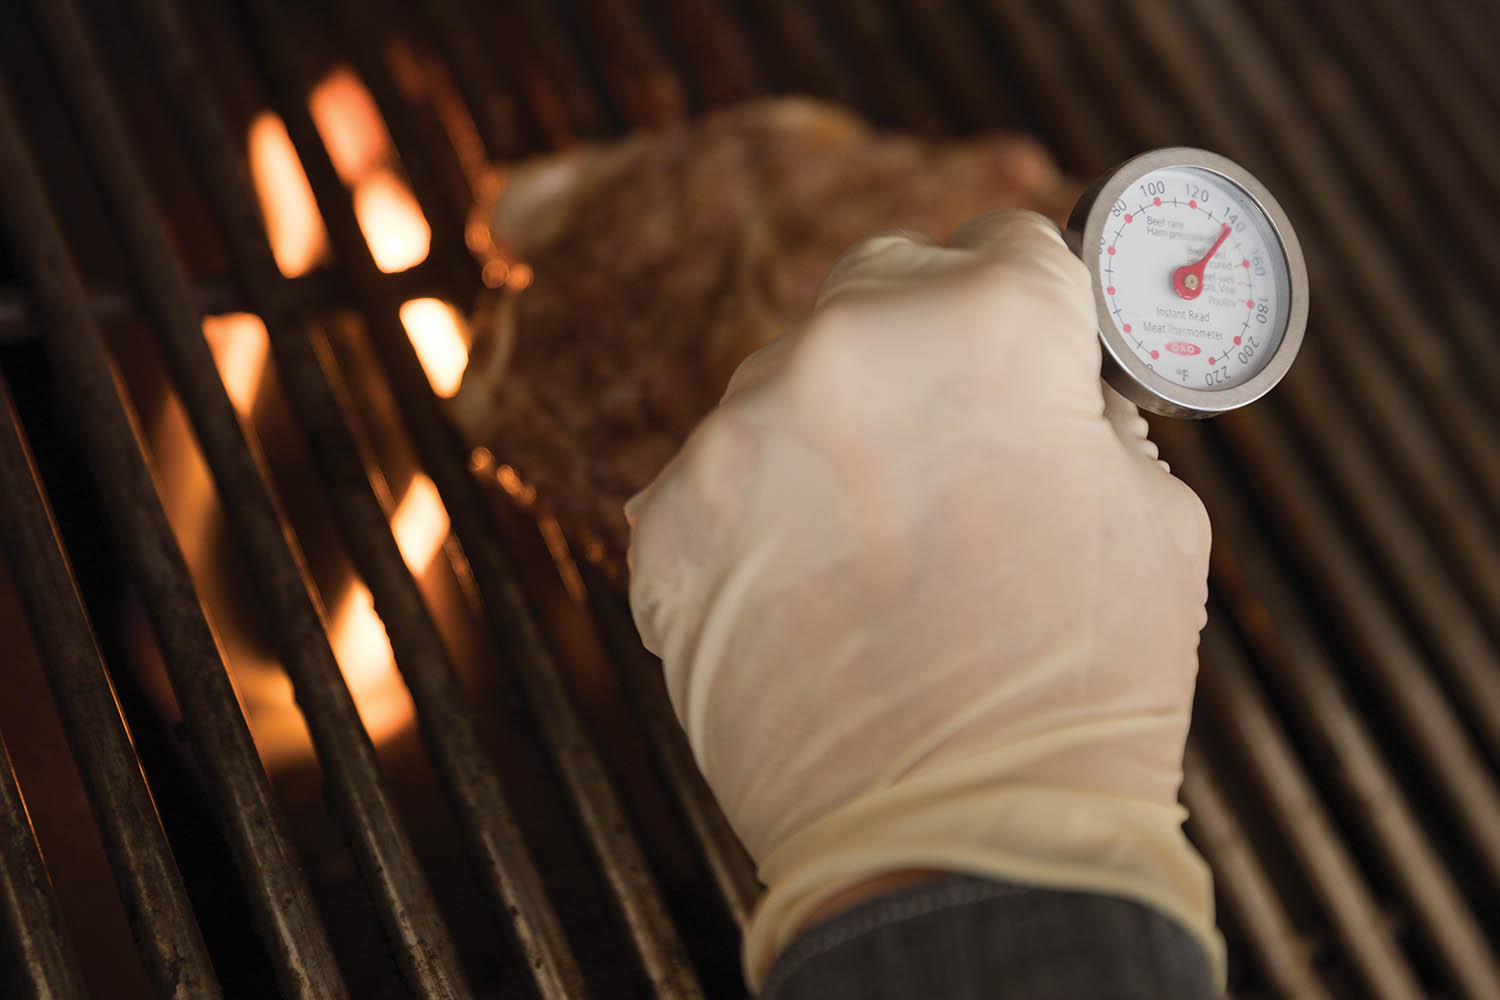 Measuring the temperature of the grill